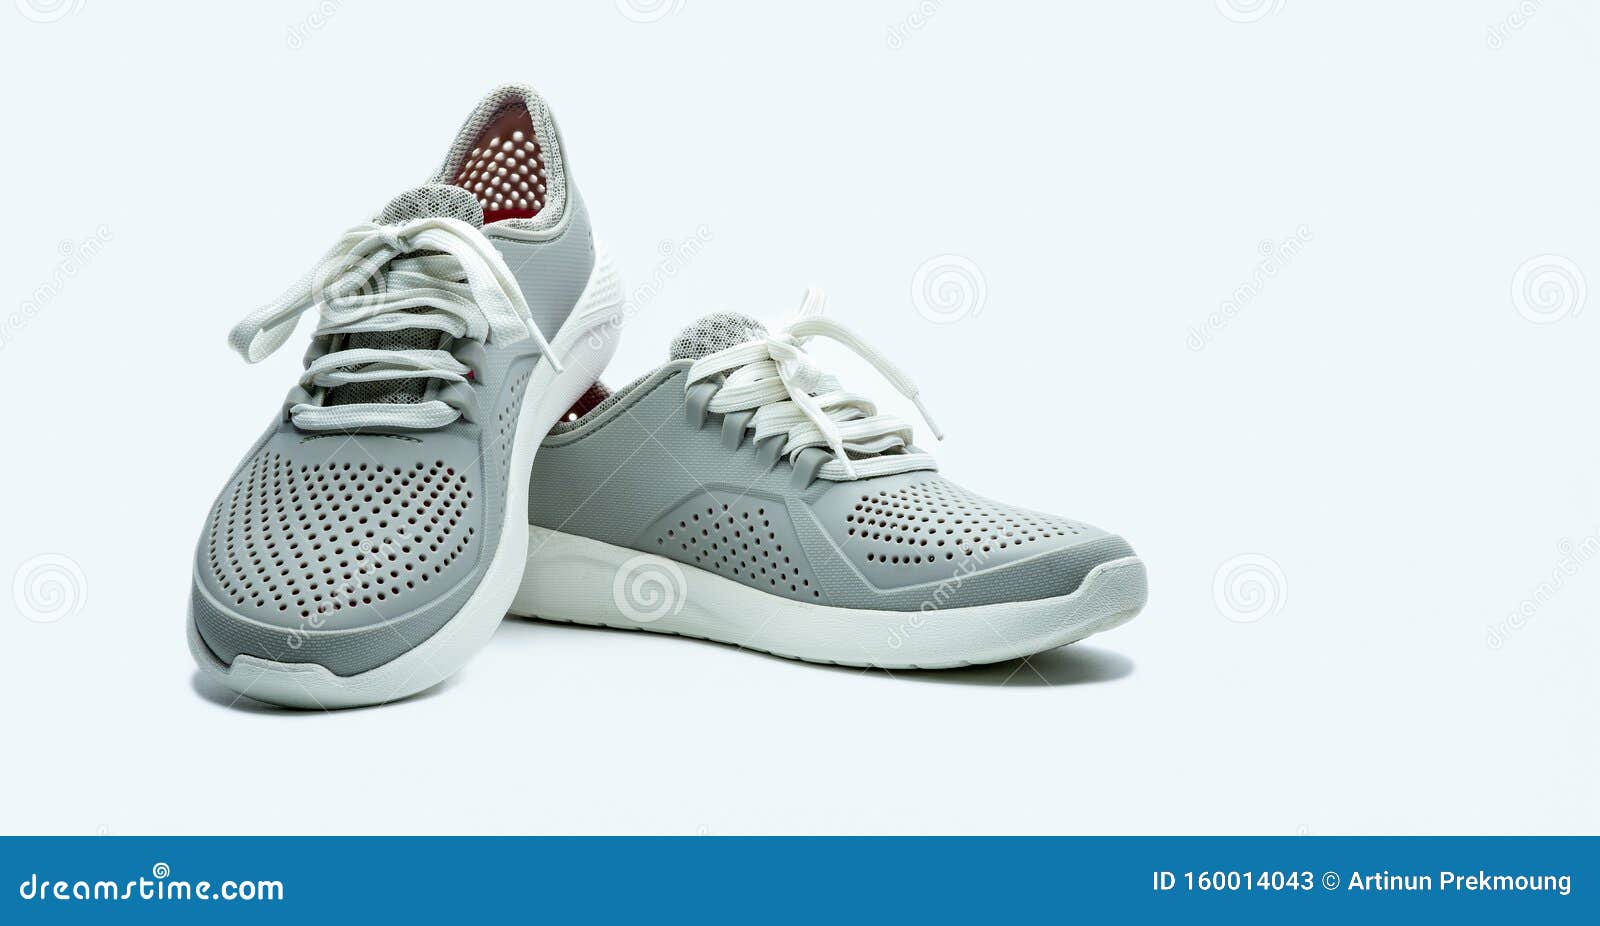 A Pair of Grey Shoes on White Background. Comfortable Shoes with Pore ...